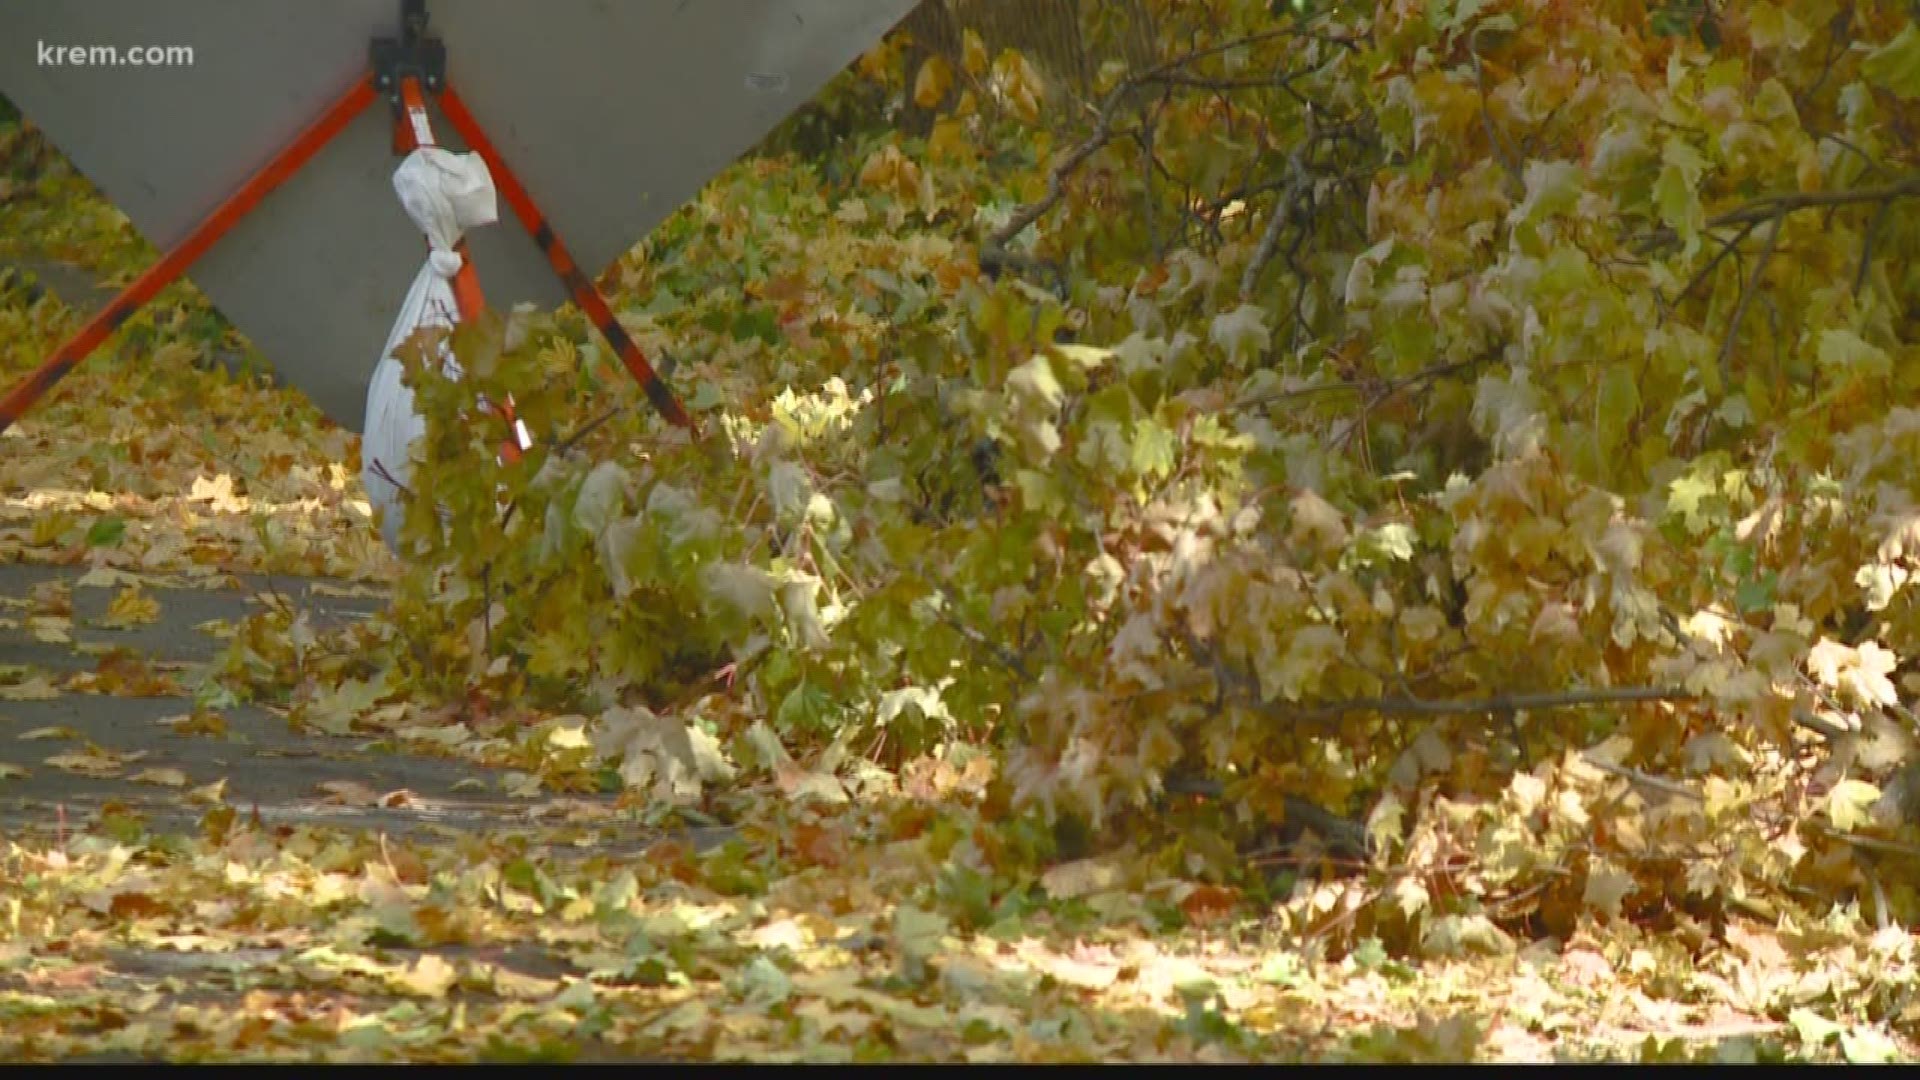 The city is still dealing with tree debris 10 days after the conclusion of a very early snowstorm.